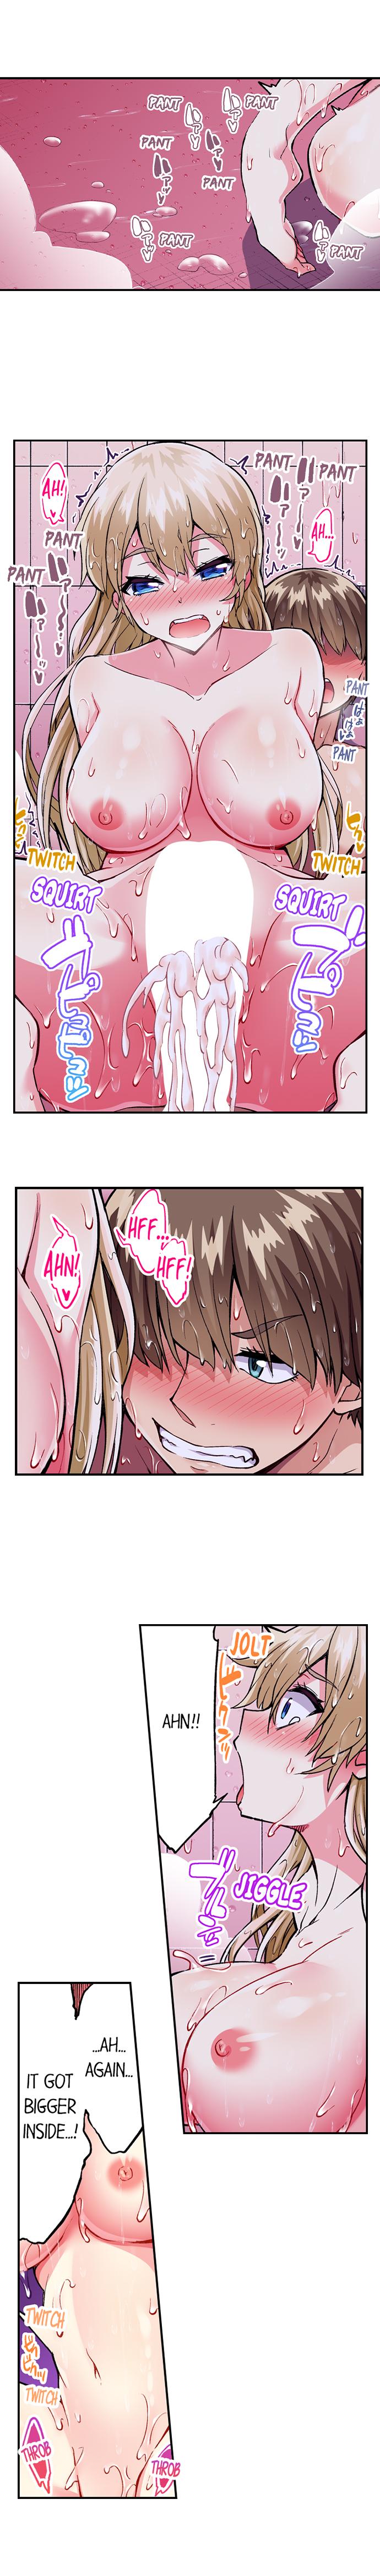 Traditional Job of Washing Girls’ Body - Chapter 183 Page 2